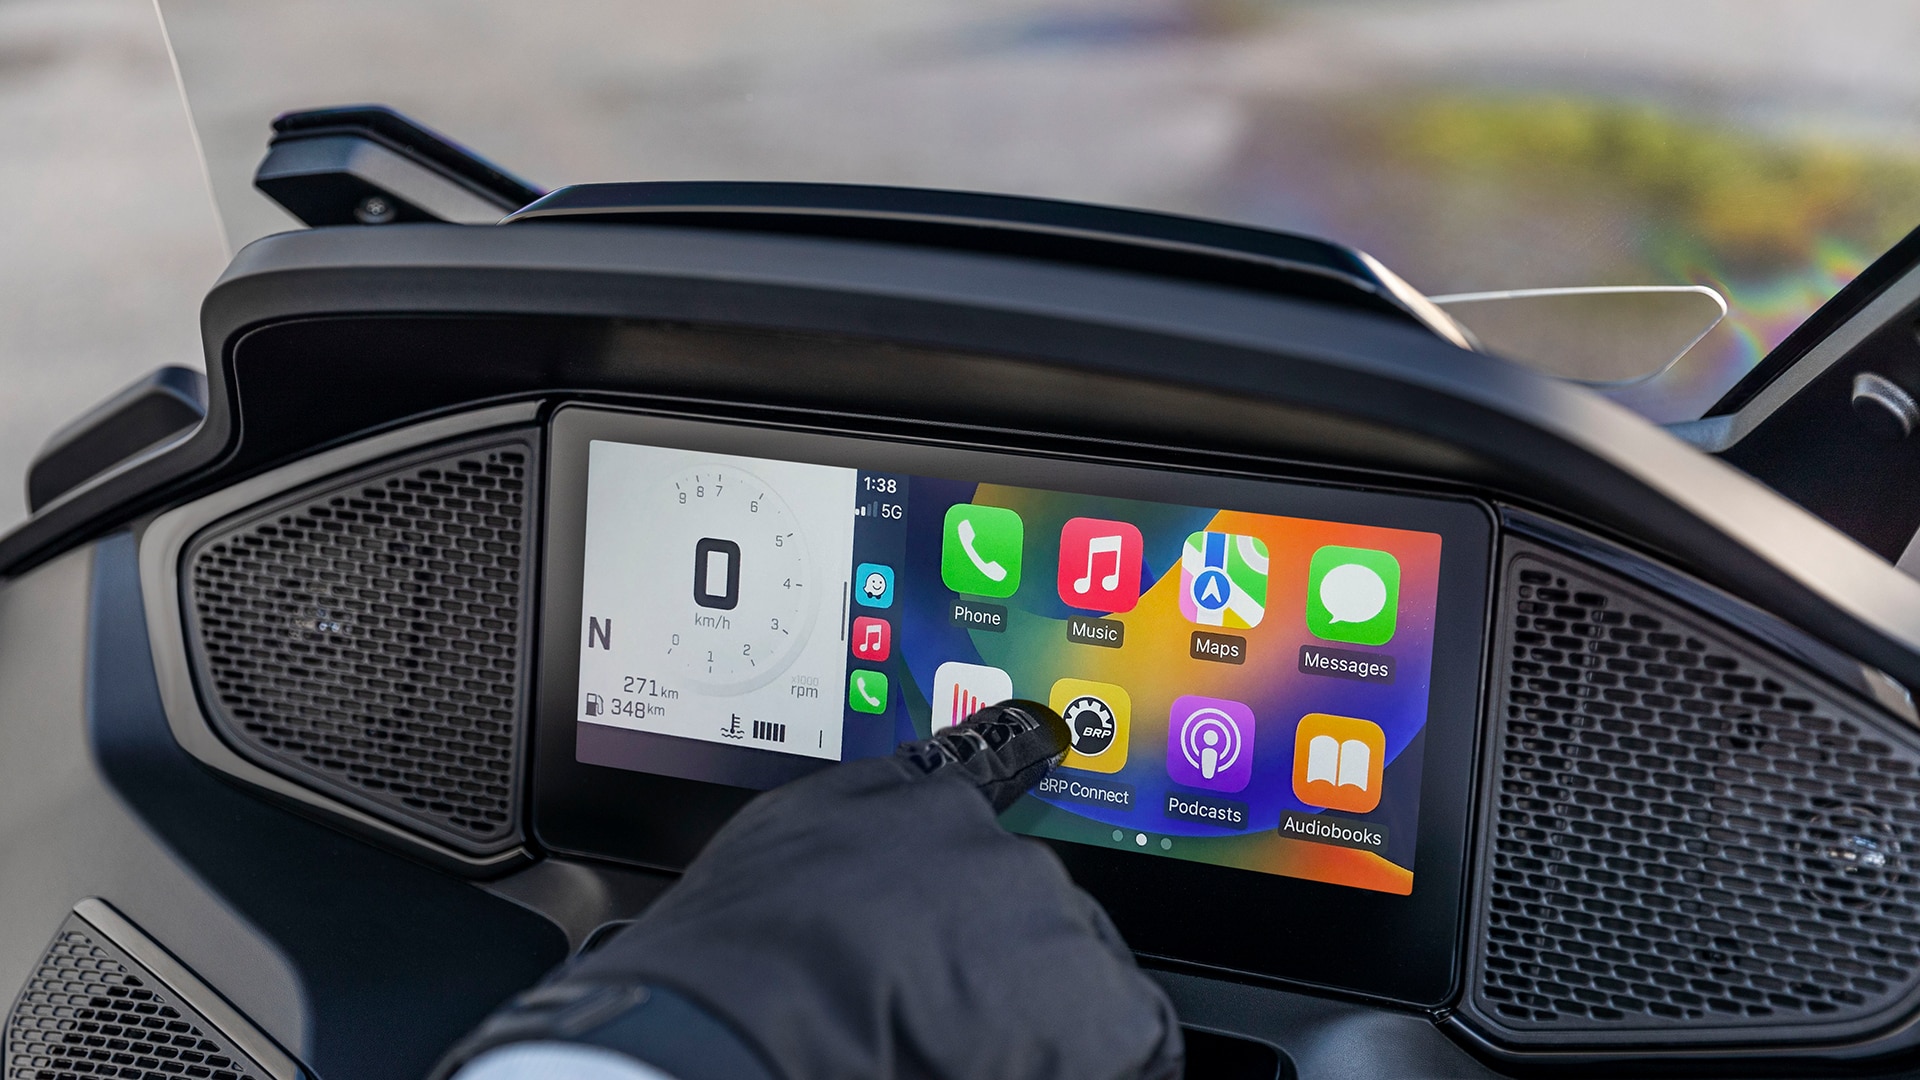 10.25" touchscreen display better connectivity with Apple CarPlay